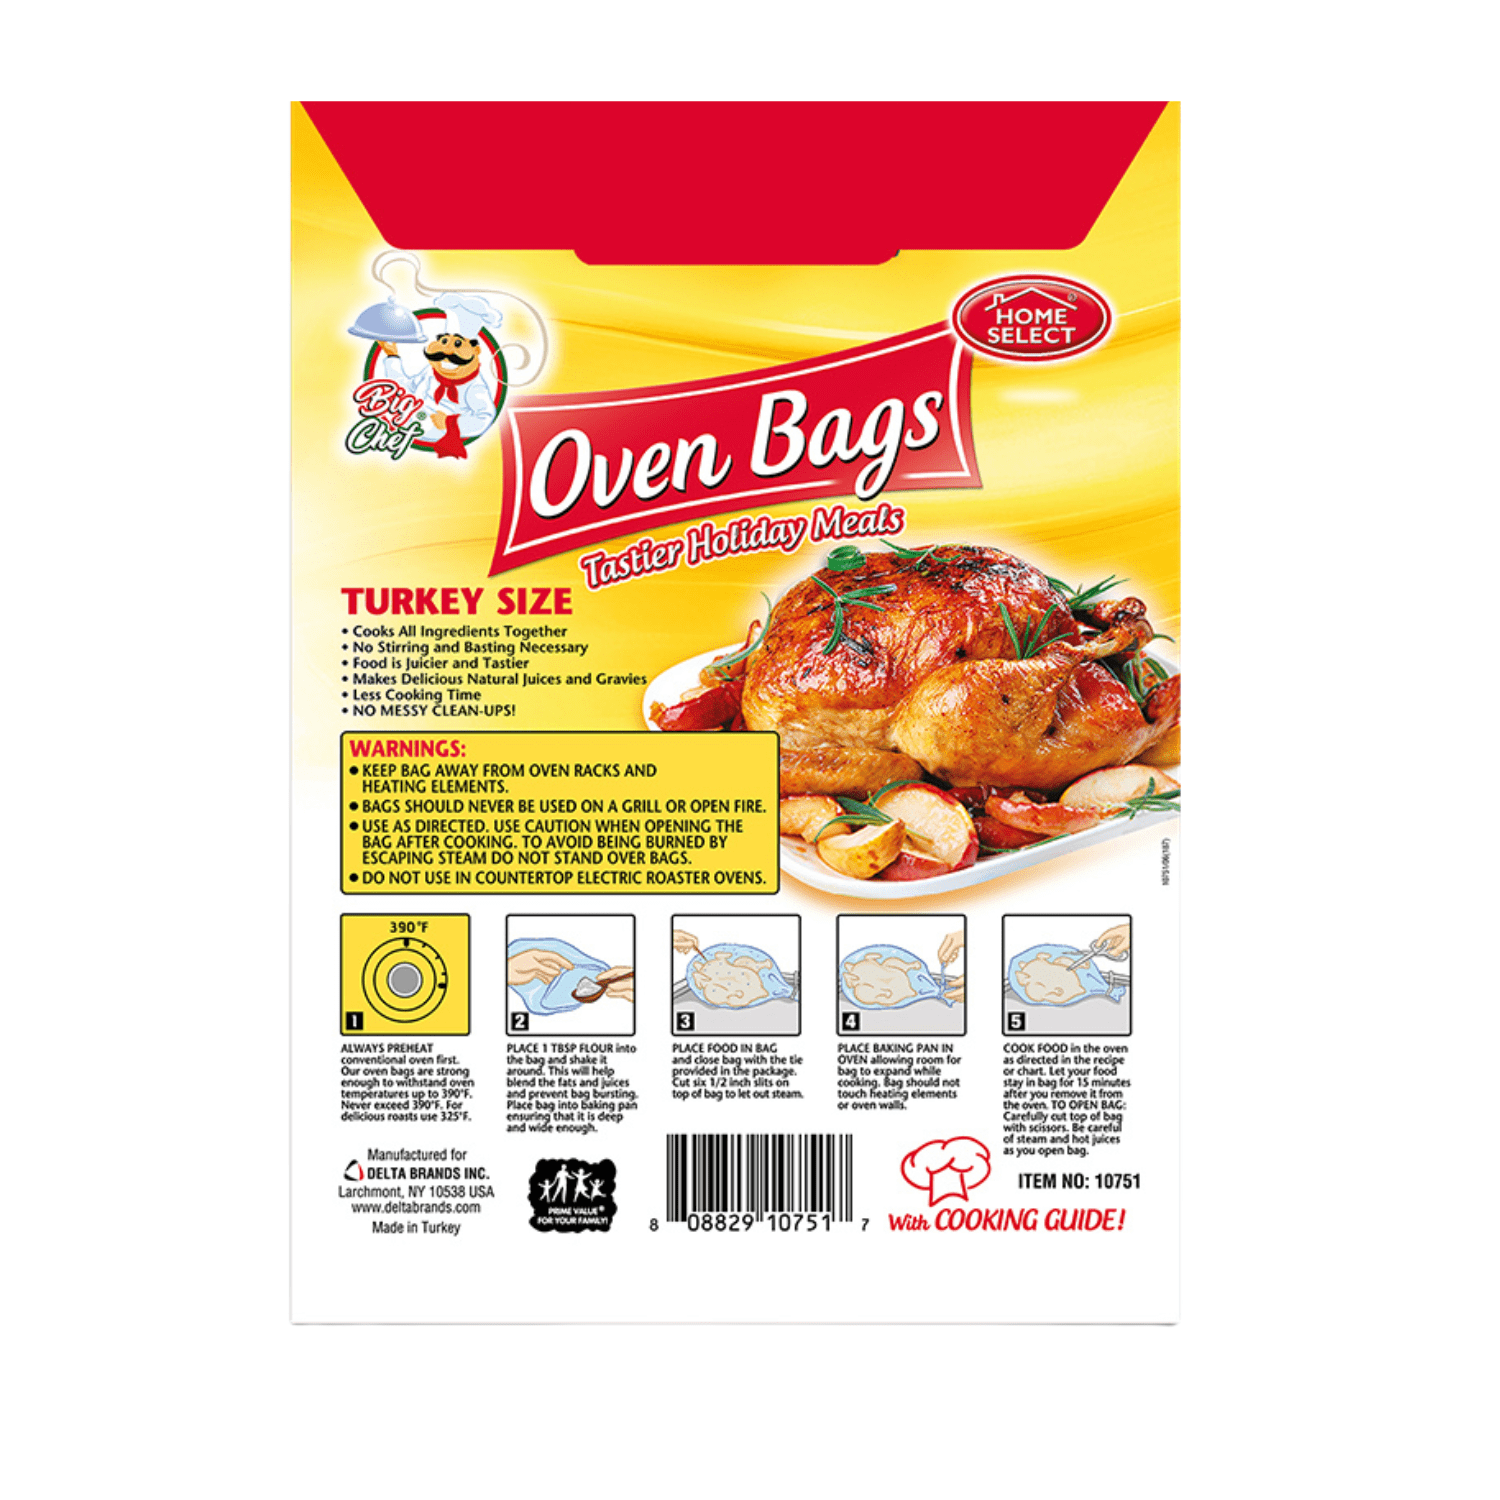 Home Select Big Check Oven Bags Turkey Size 2 Bags